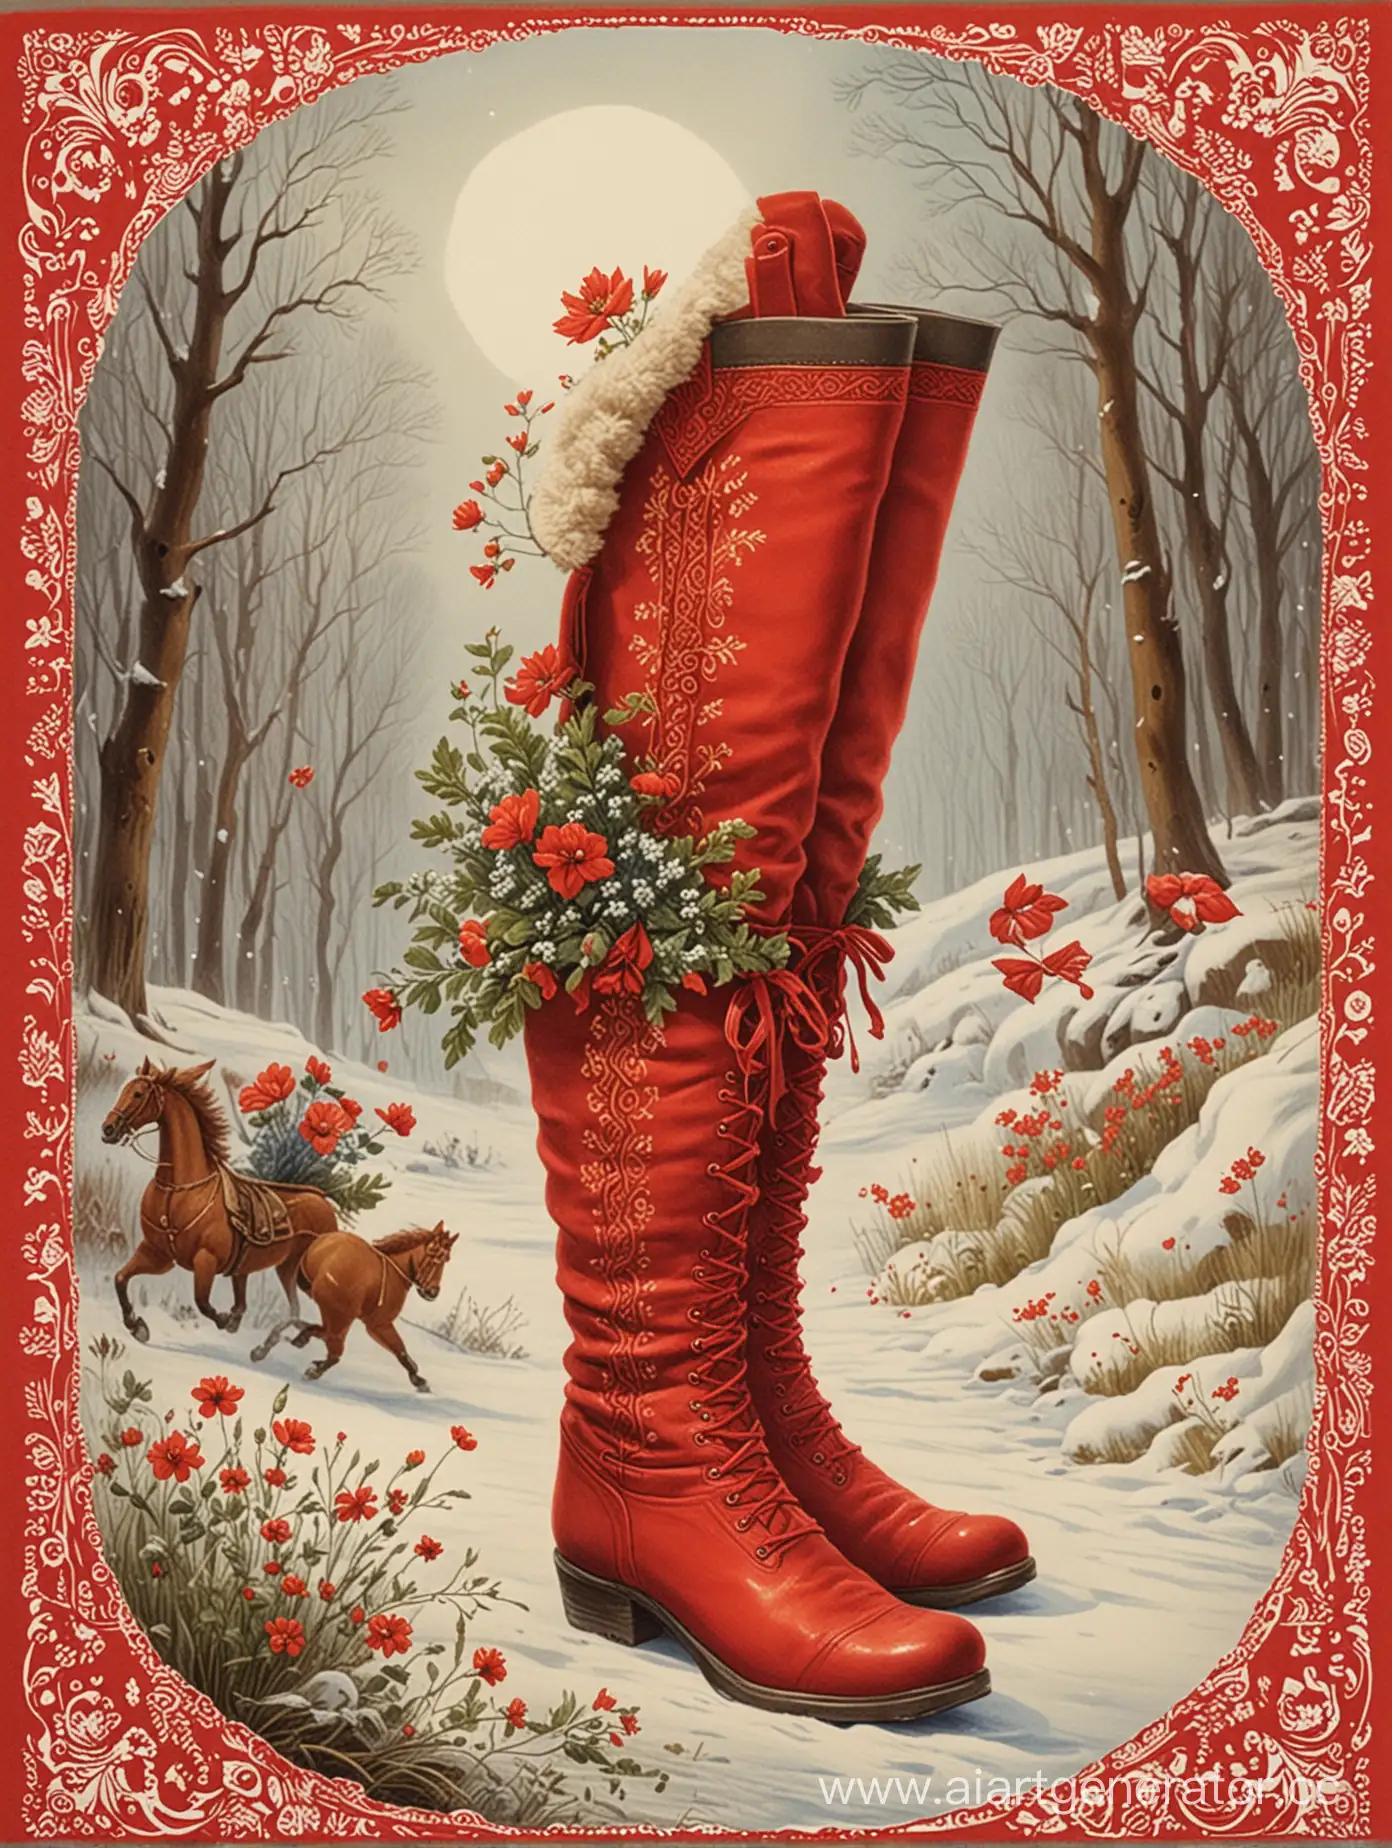 Russian-Folk-Tale-Inspired-Card-with-Red-Boots